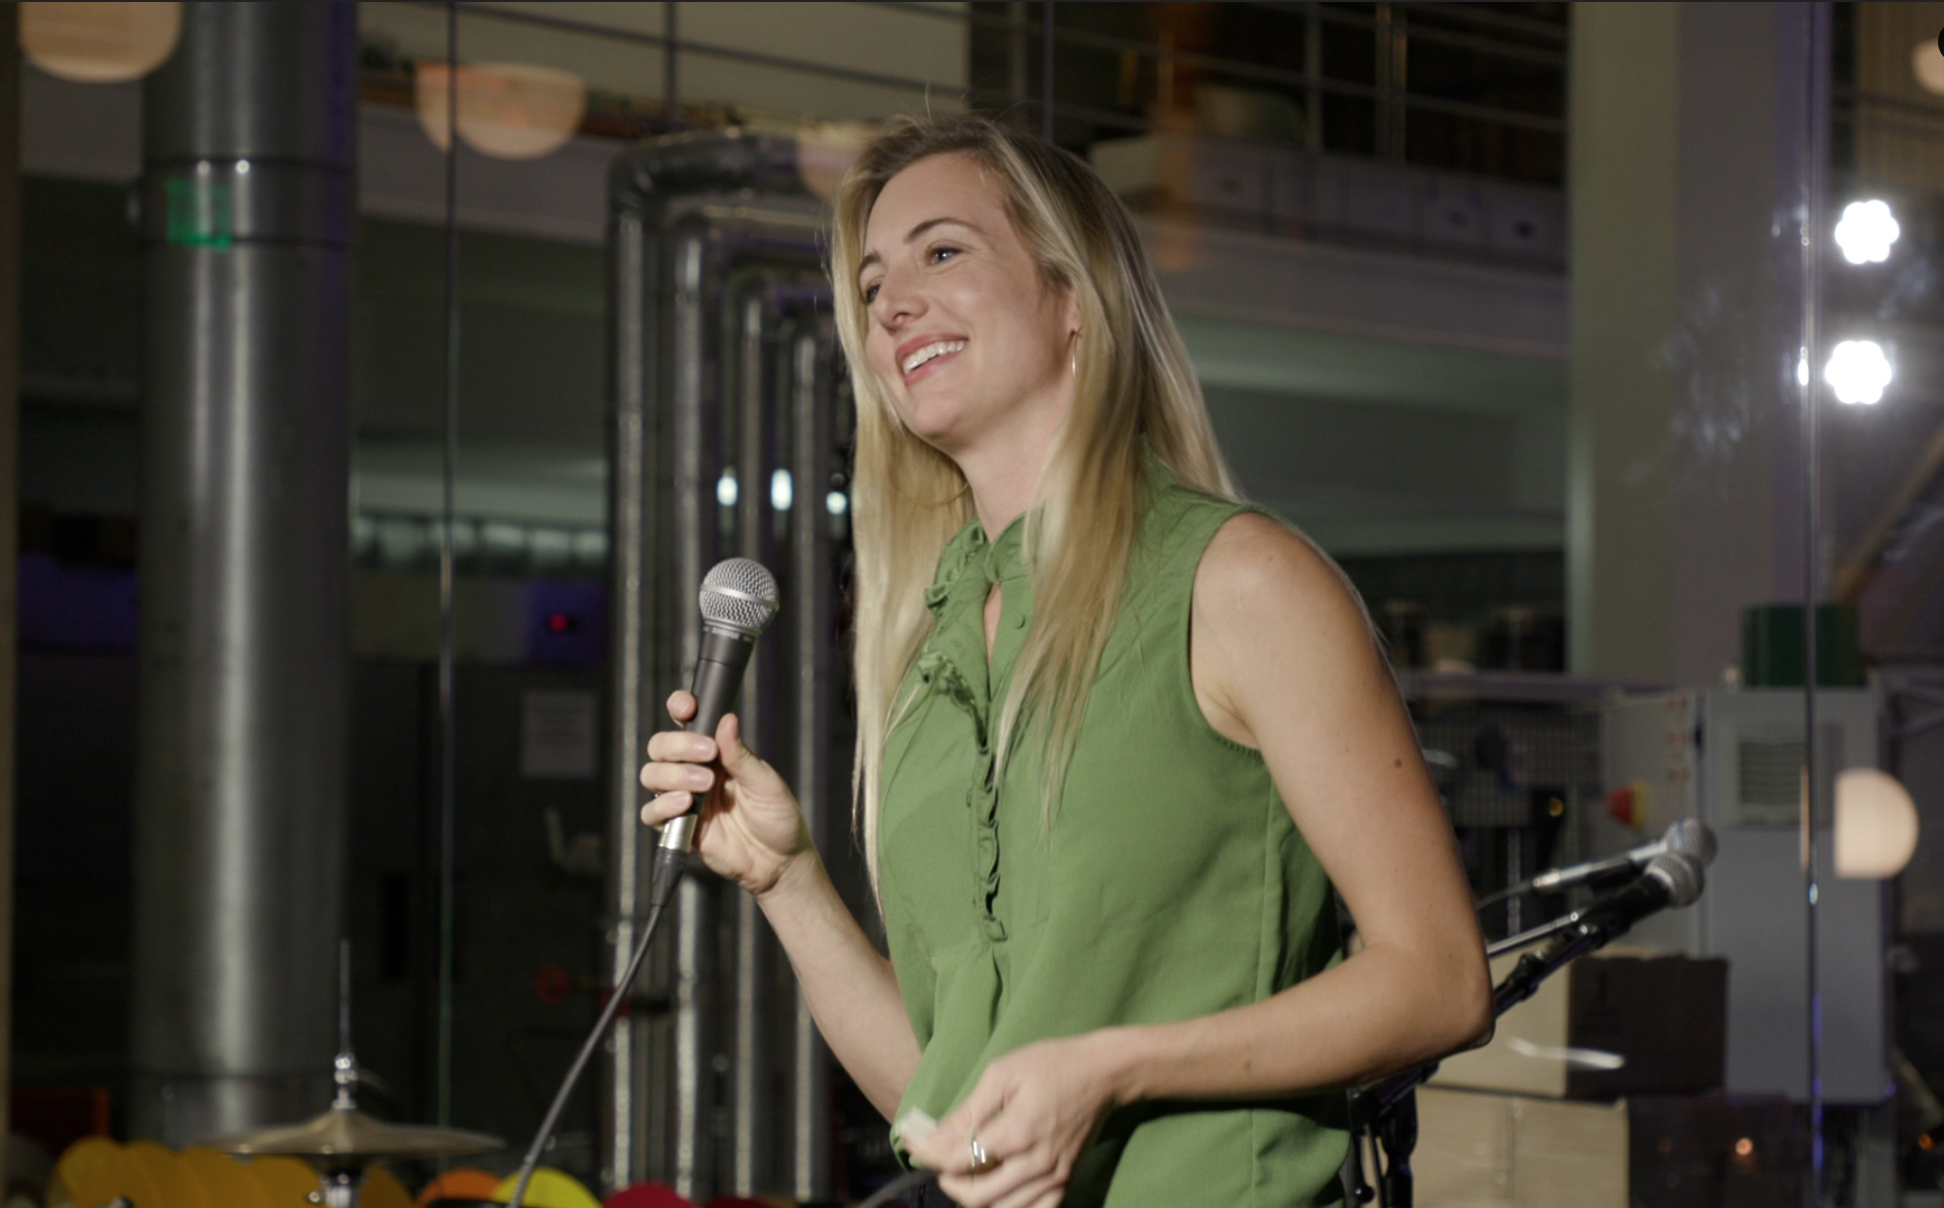 A woman wearing a green shirt speaks into a microphone at an event.